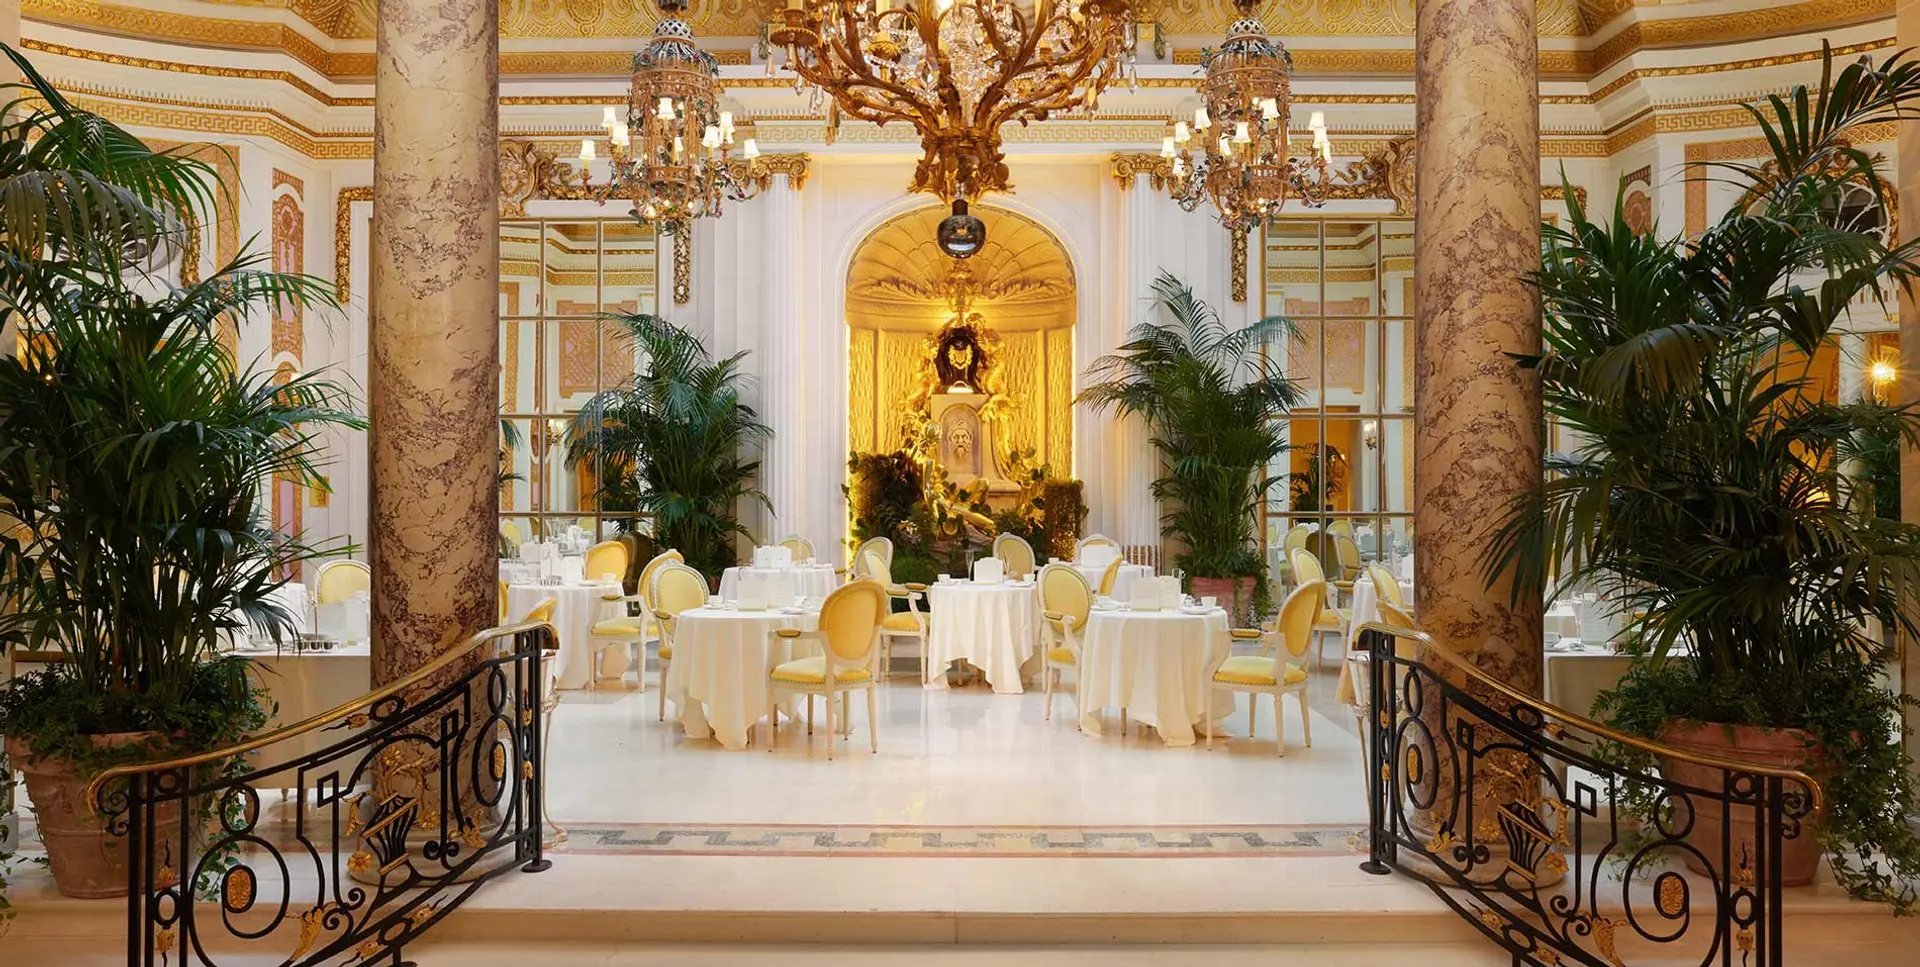 Hotel review Style' - The Ritz London - 0